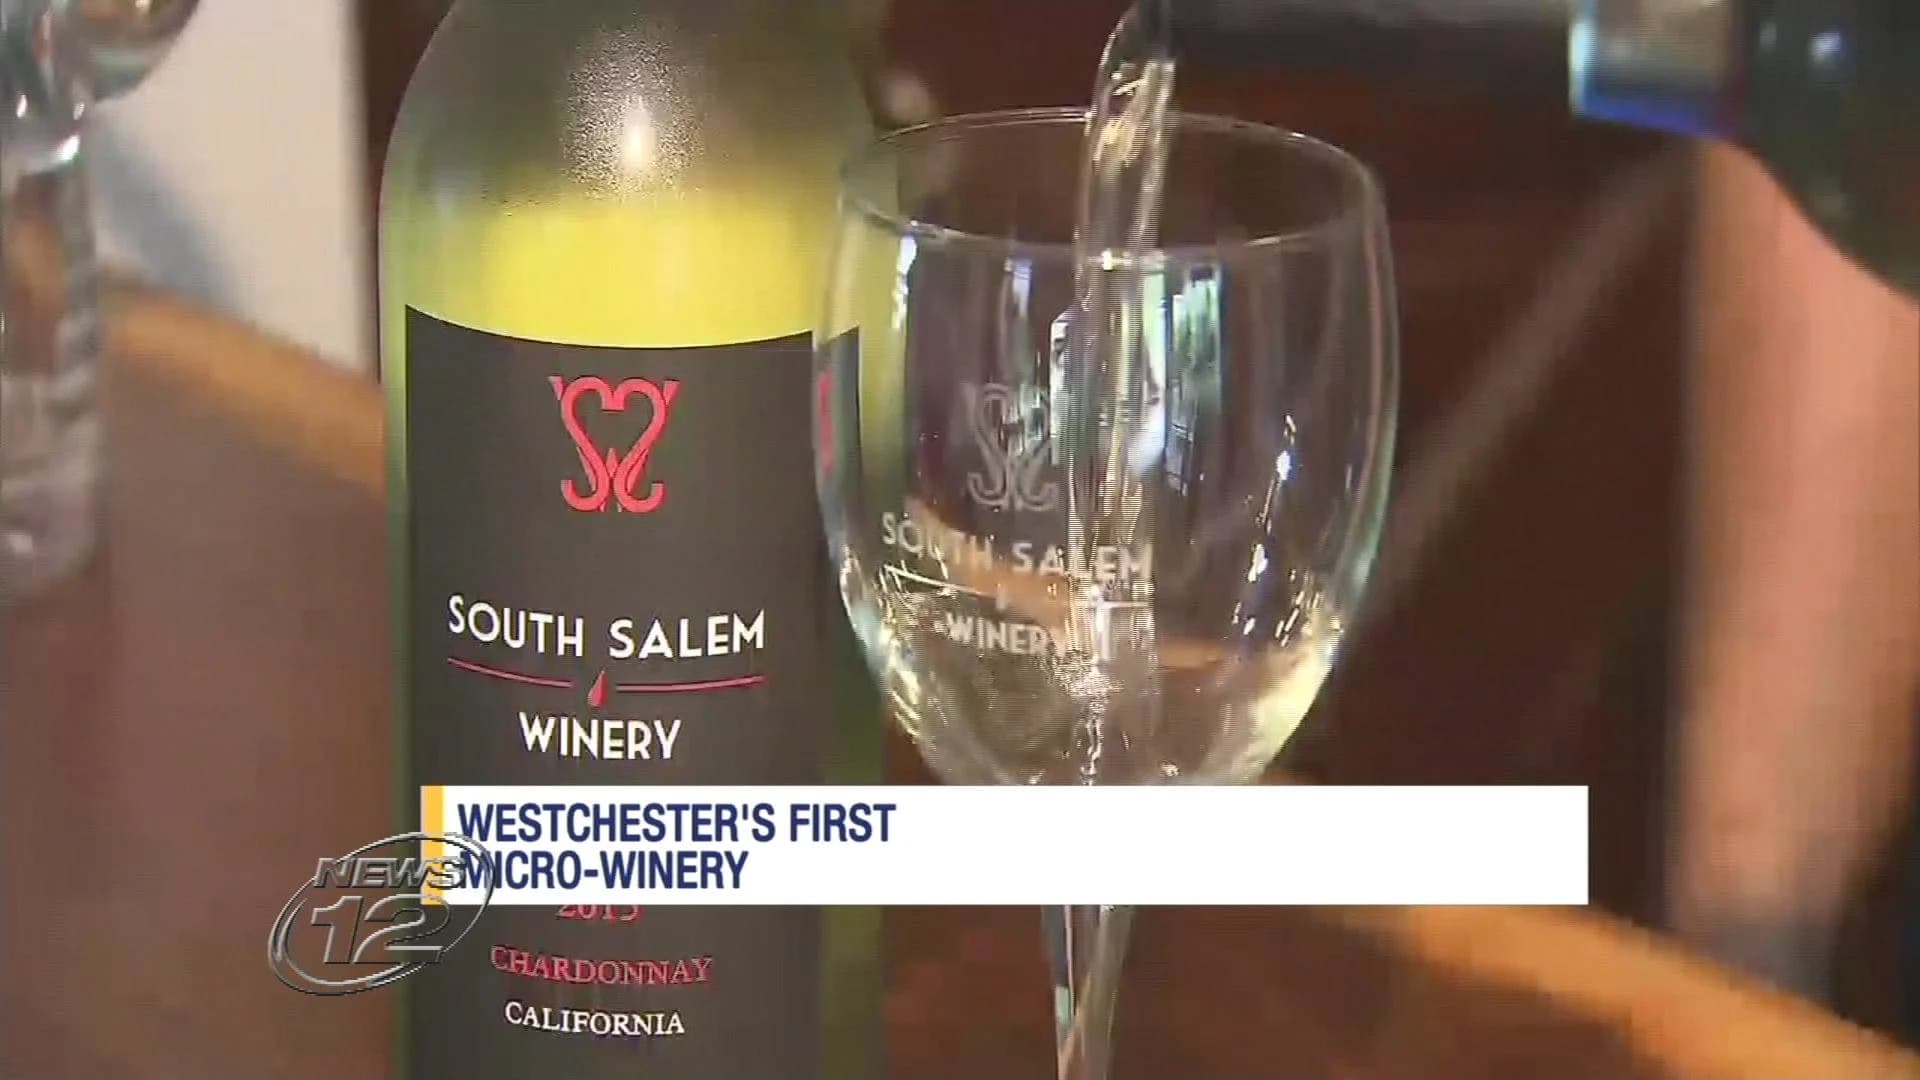 South Salem home to Westchester’s first microwinery